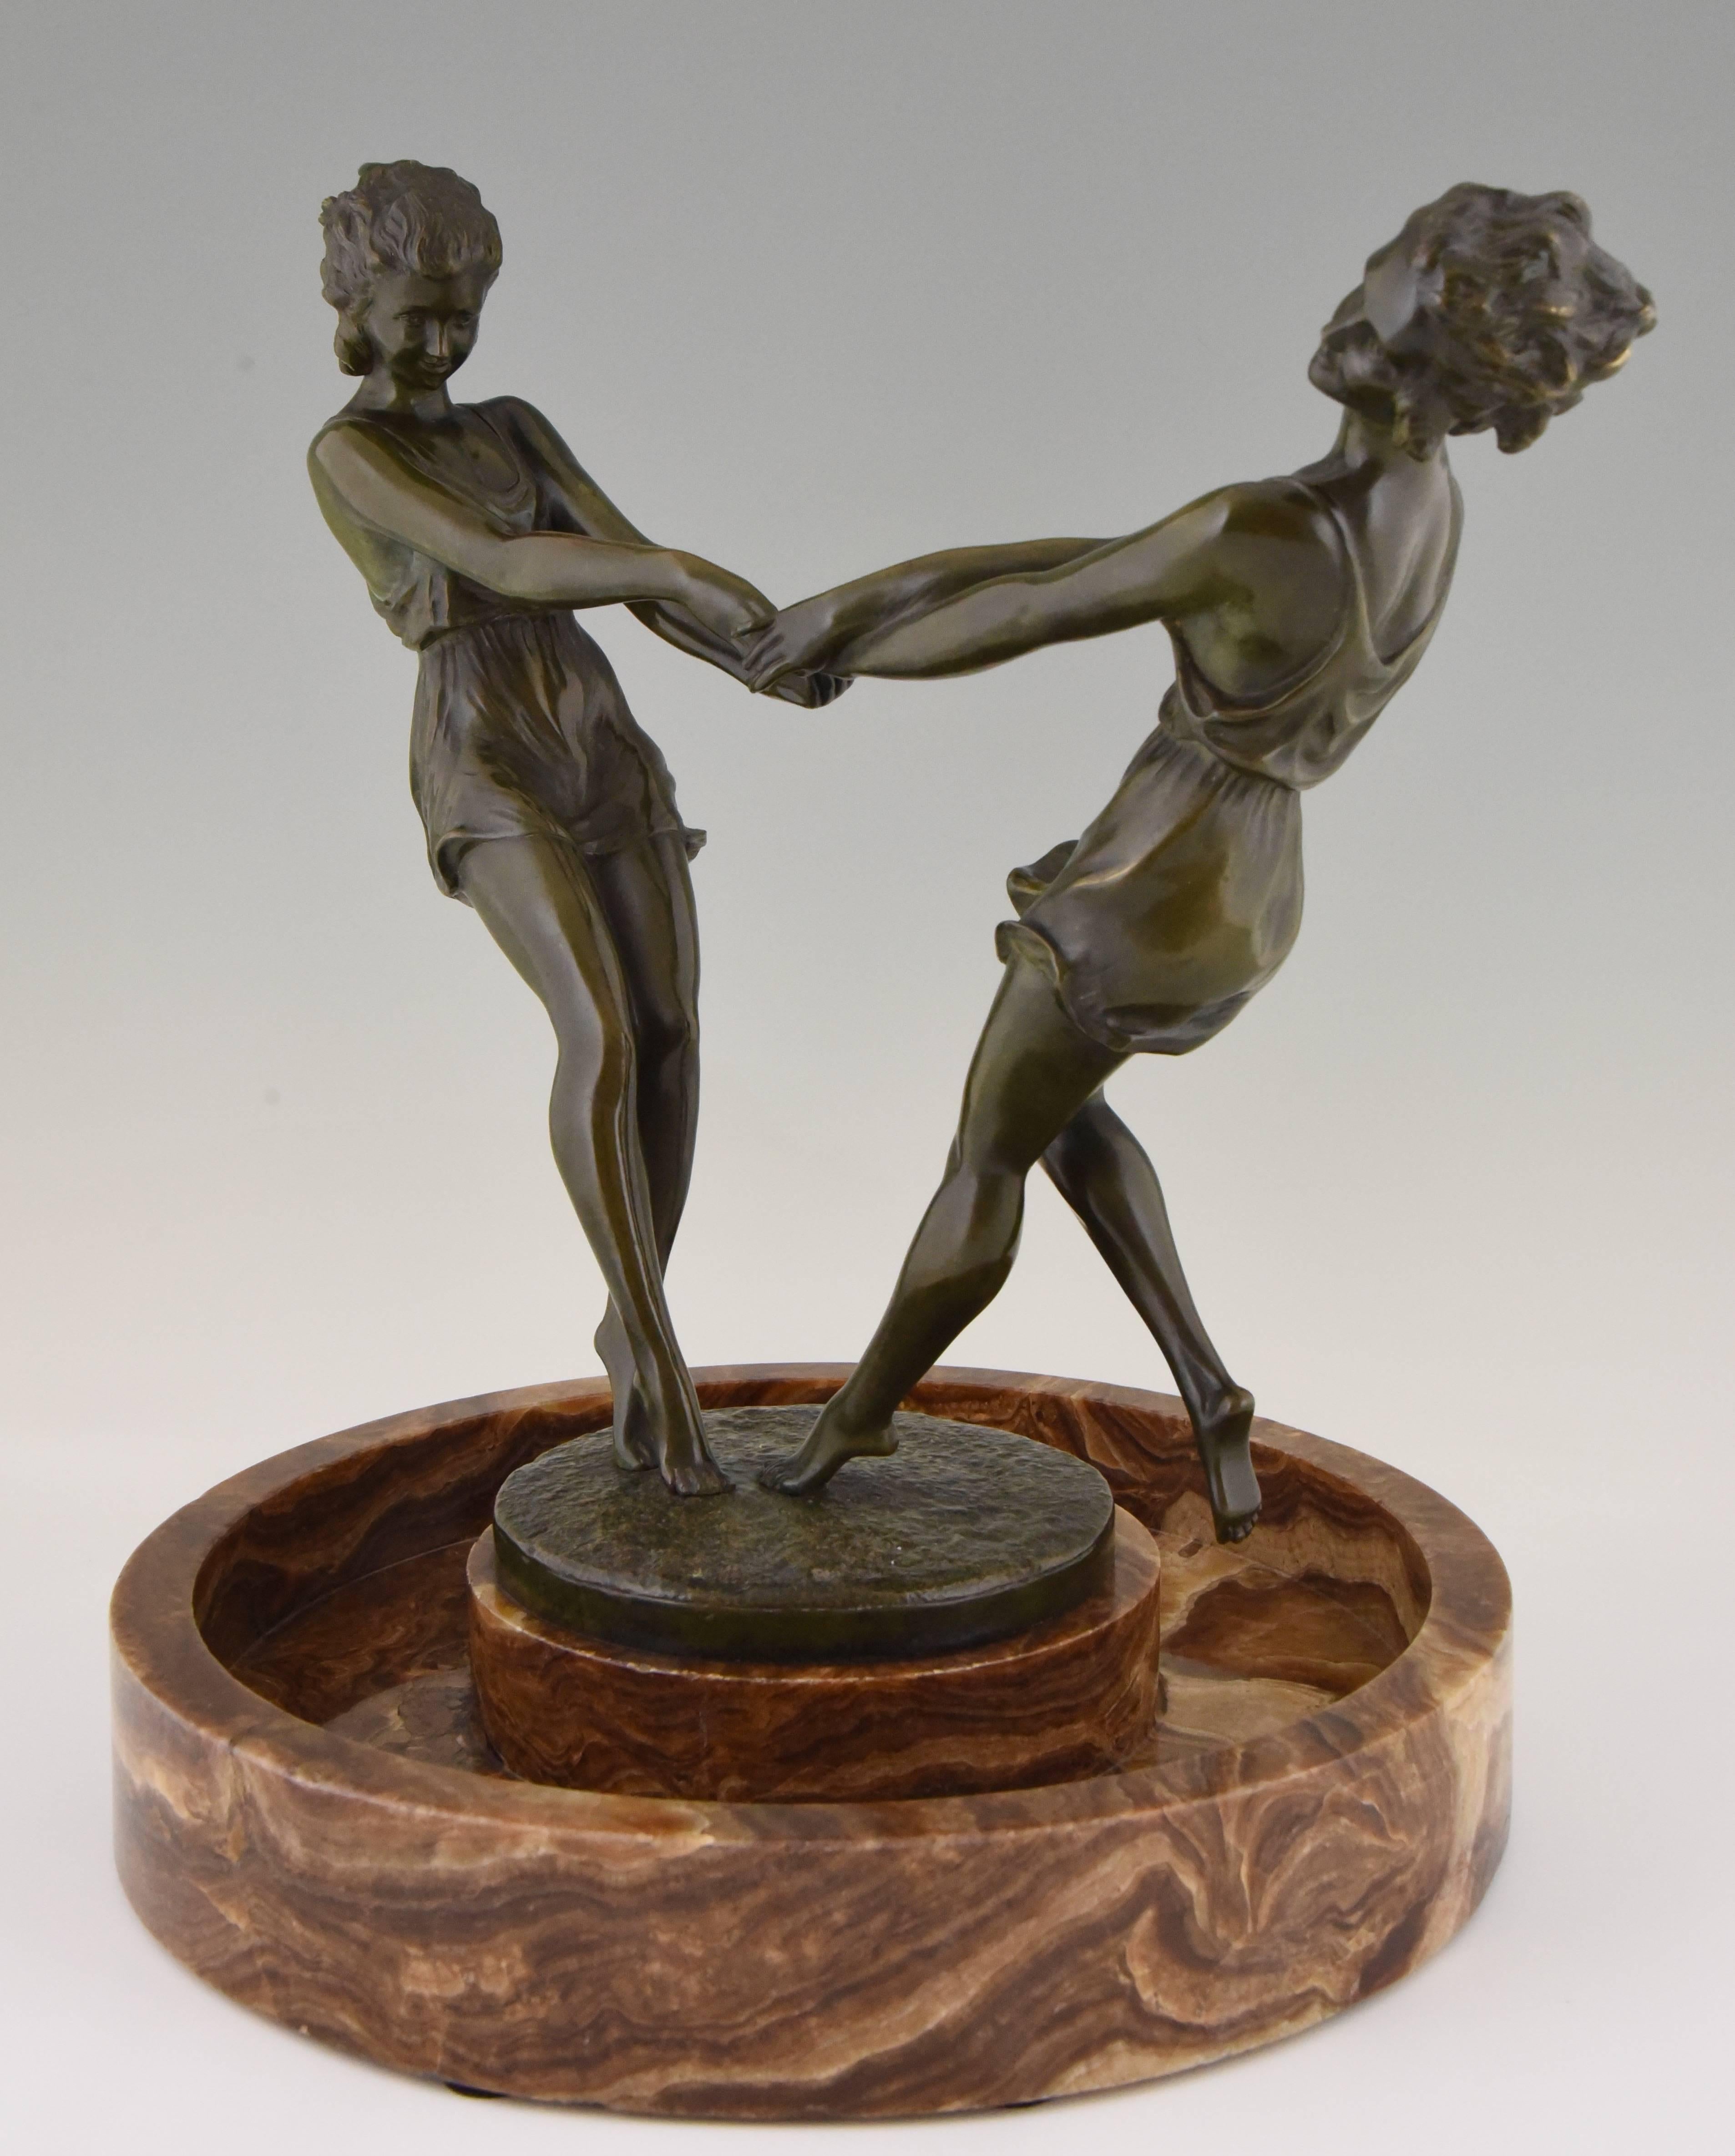 Whirling, an impressive circular marble centrepiece with a bronze sculpture of two dancing girls holding hands by the French artist Andre Gilbert.
Signature/ marks: Andre Gilbert
Style: Art Deco
Date: 1925
Material: Bronze with green patina.